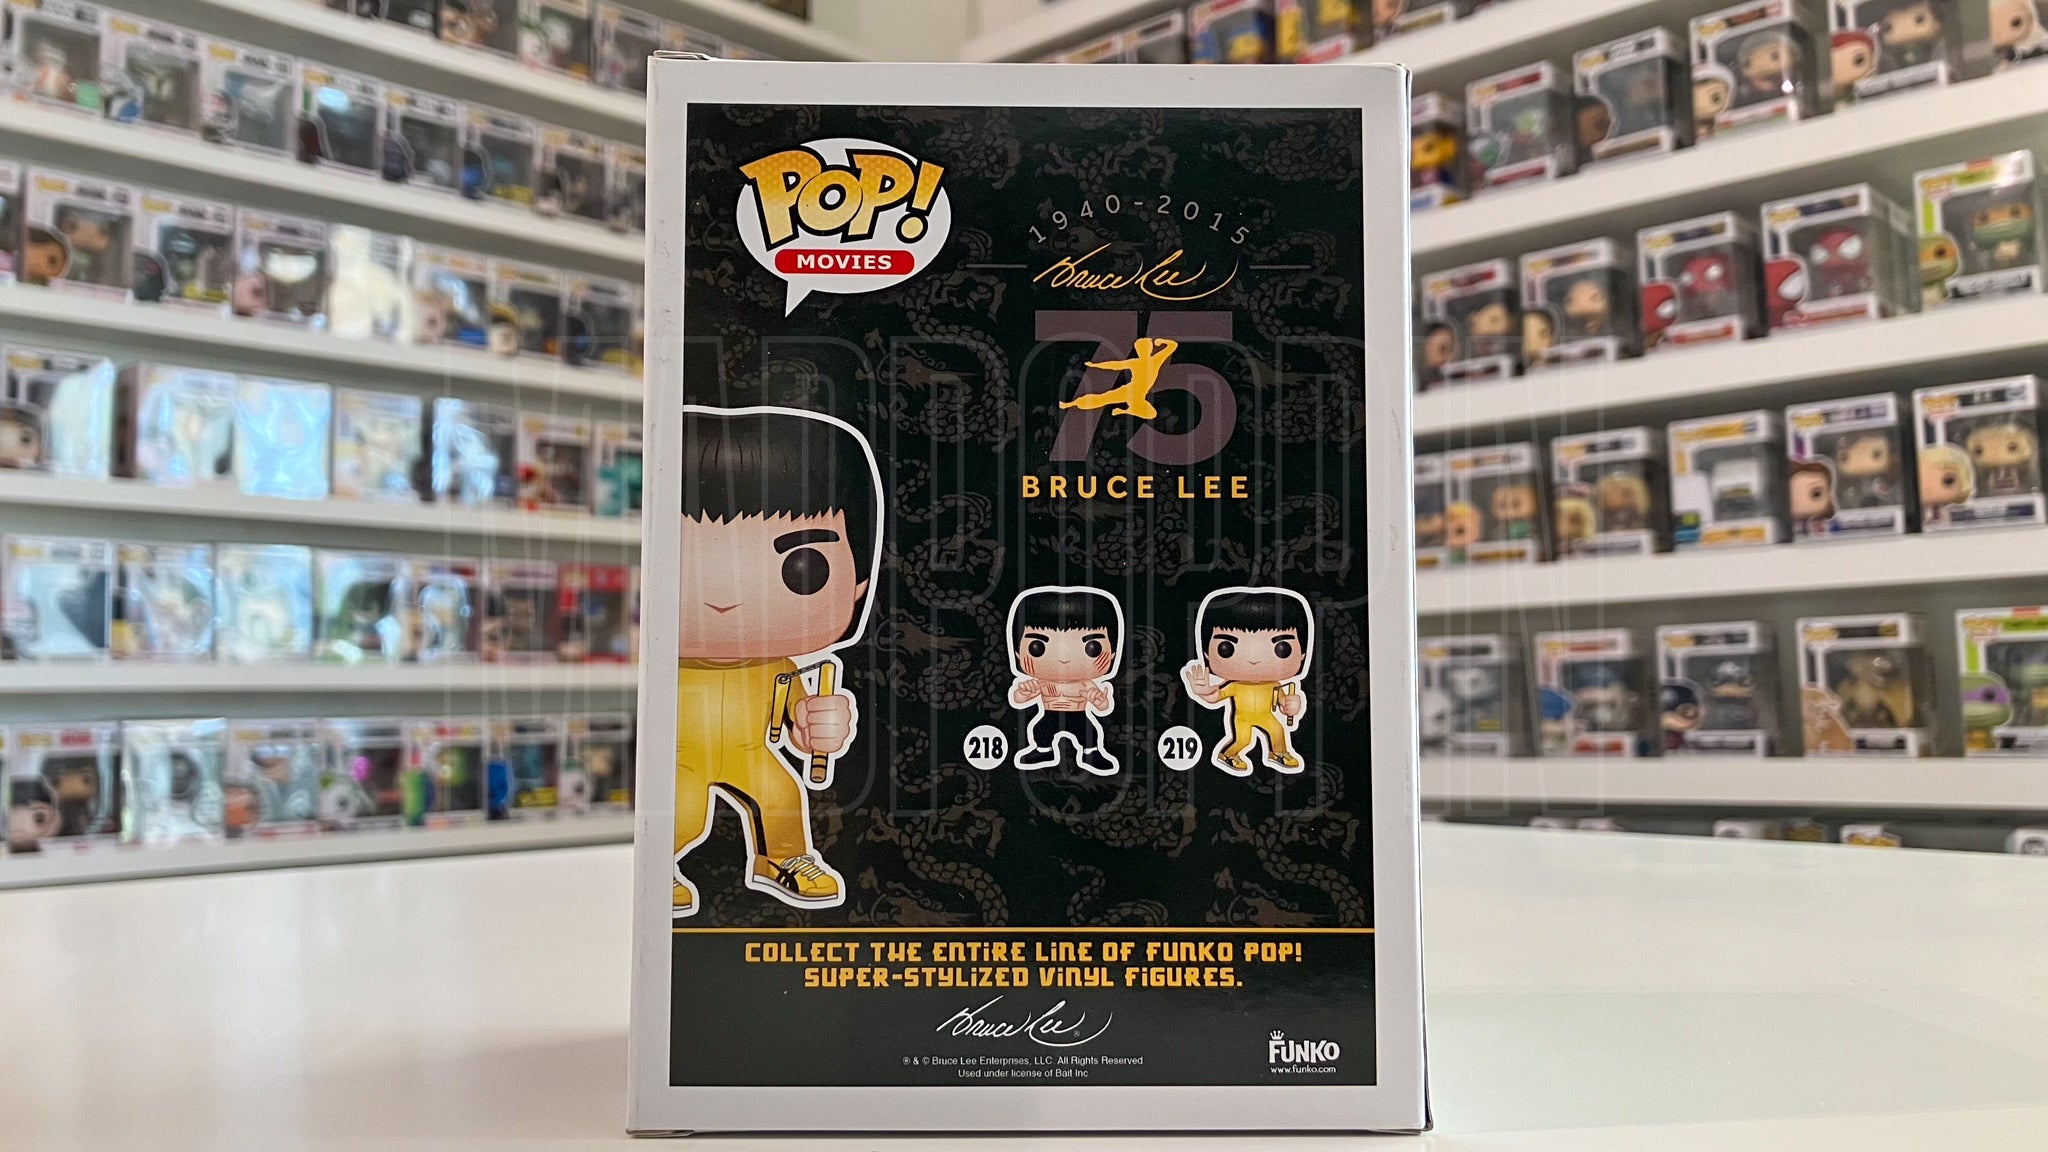 POP! Movies: Bruce Lee - Bruce Lee (Enter the Dragon)